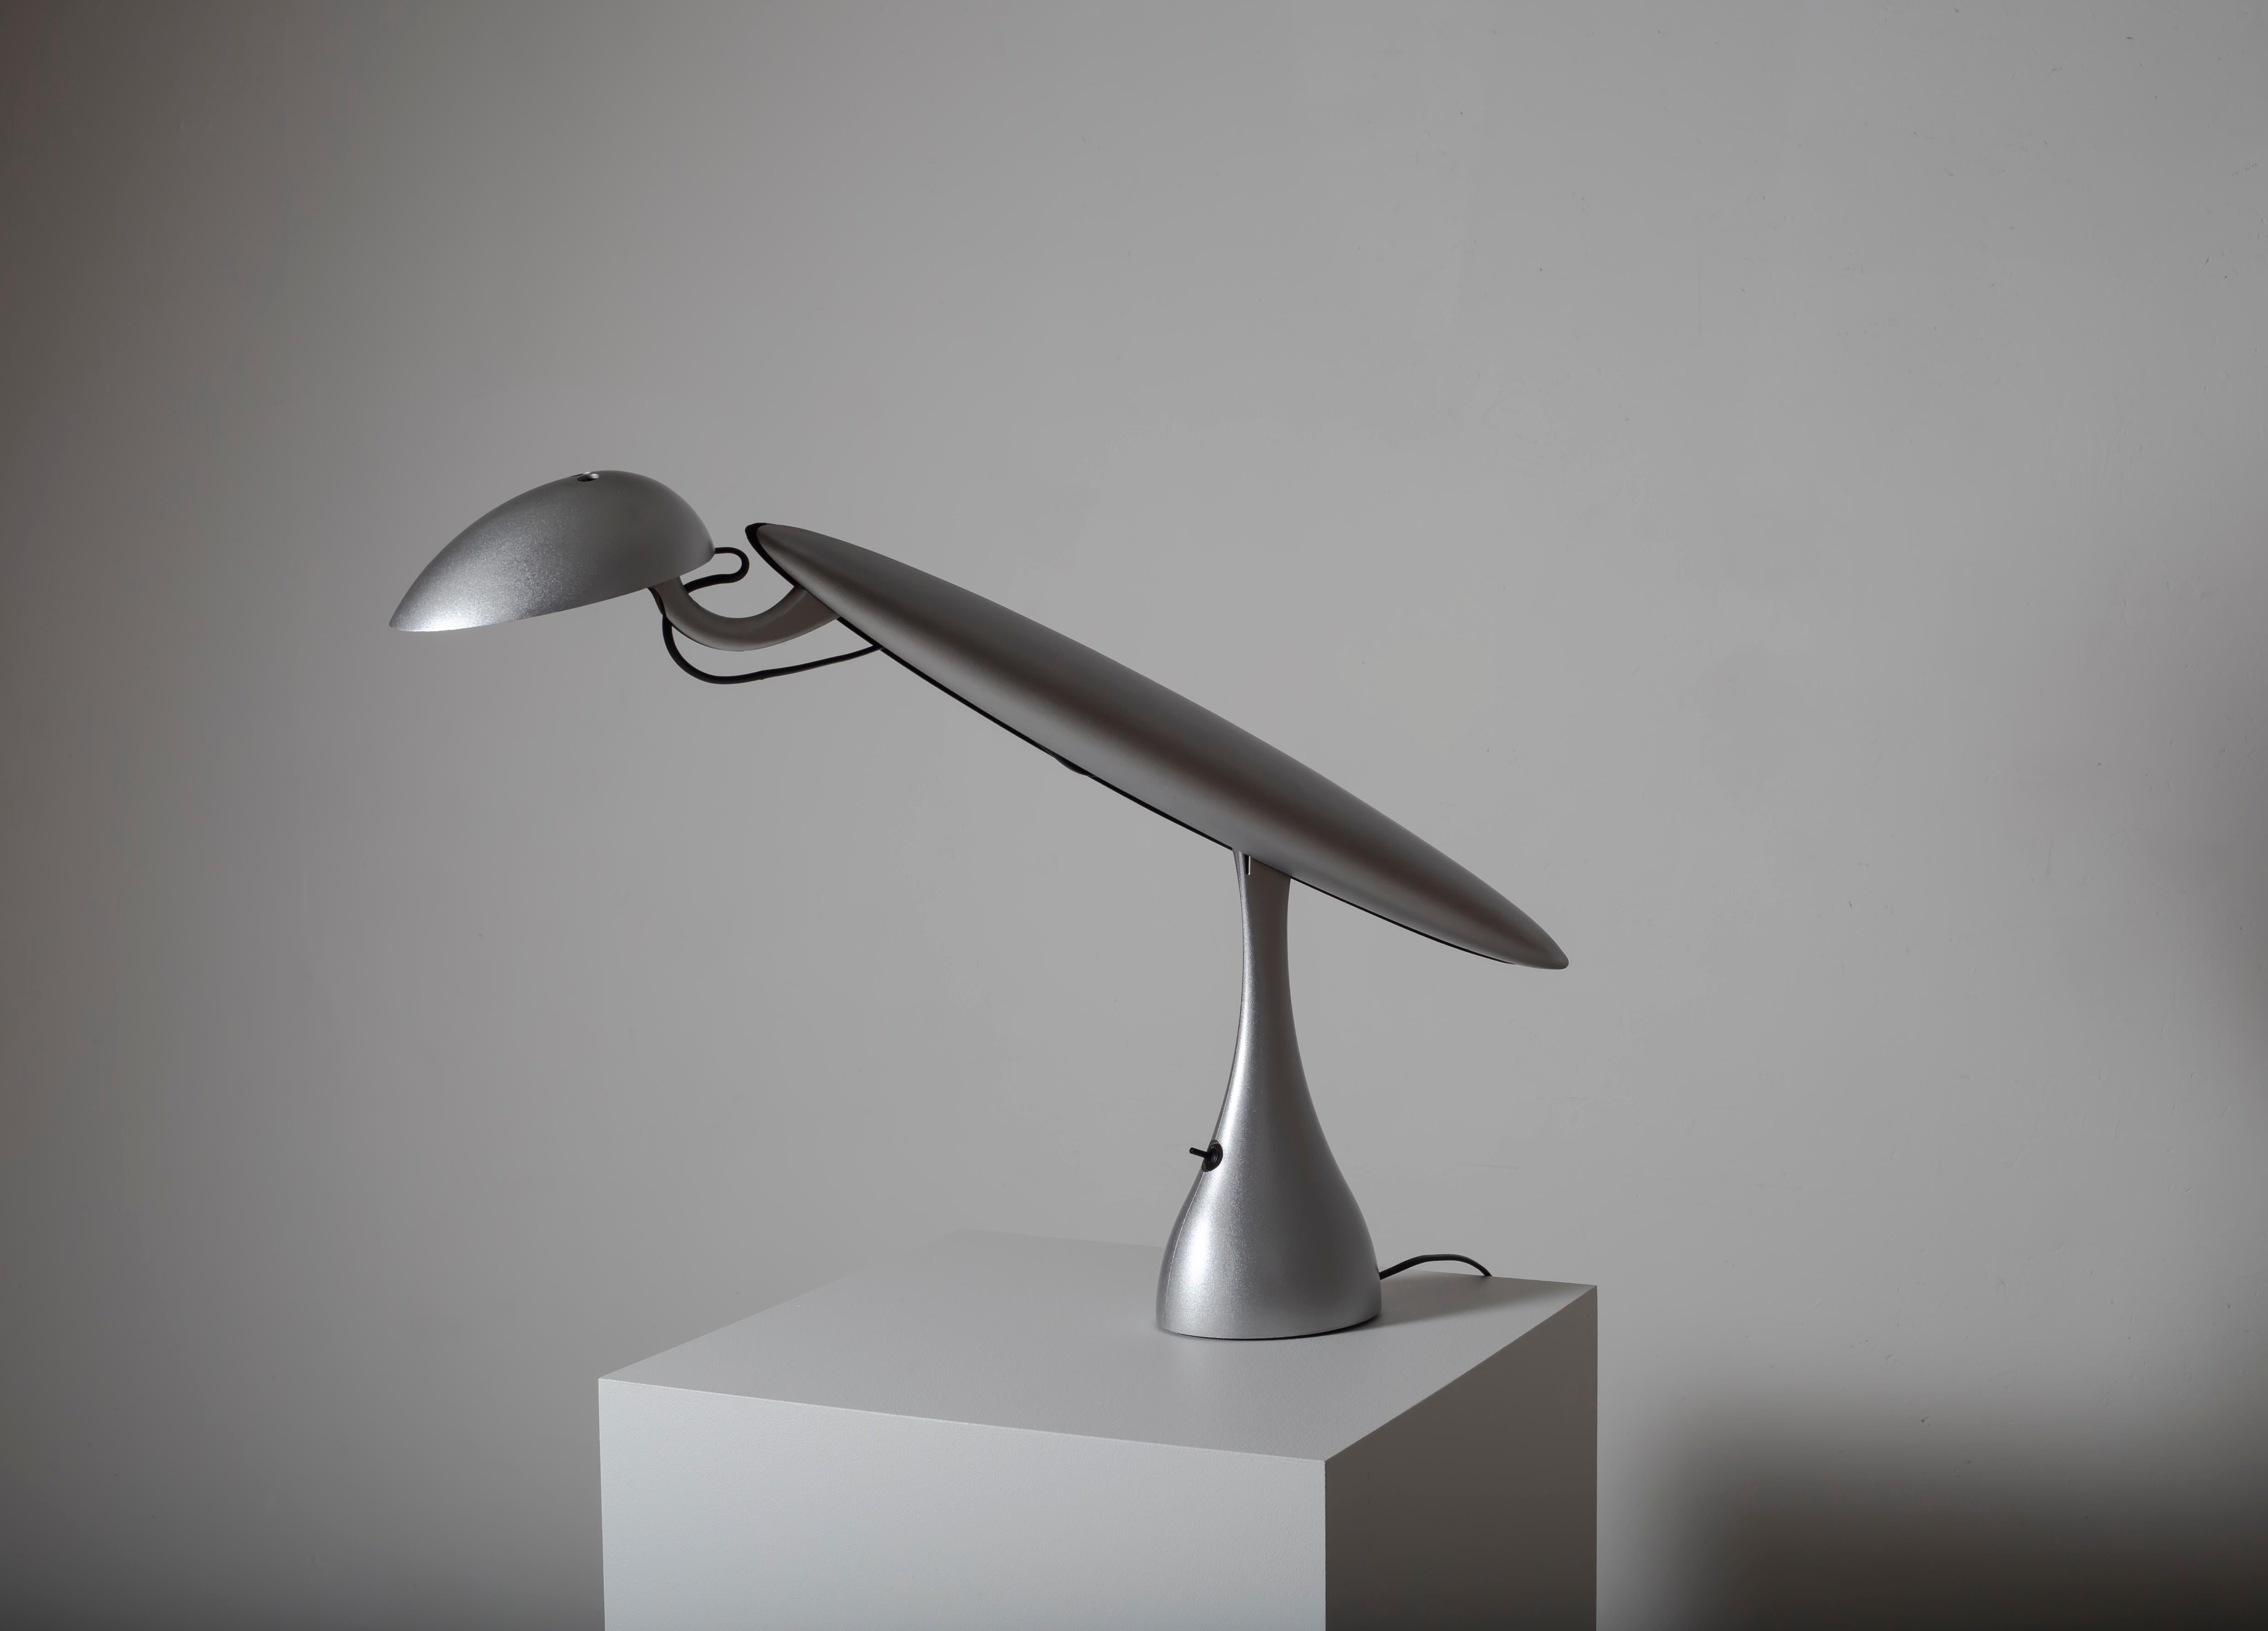 Iconic table lamp designed by Isao Hosoe for the Norwegian lamp maker Luxo. Moulded plastic in a lacquered silver coating. The lamp is fully working and in good condition.